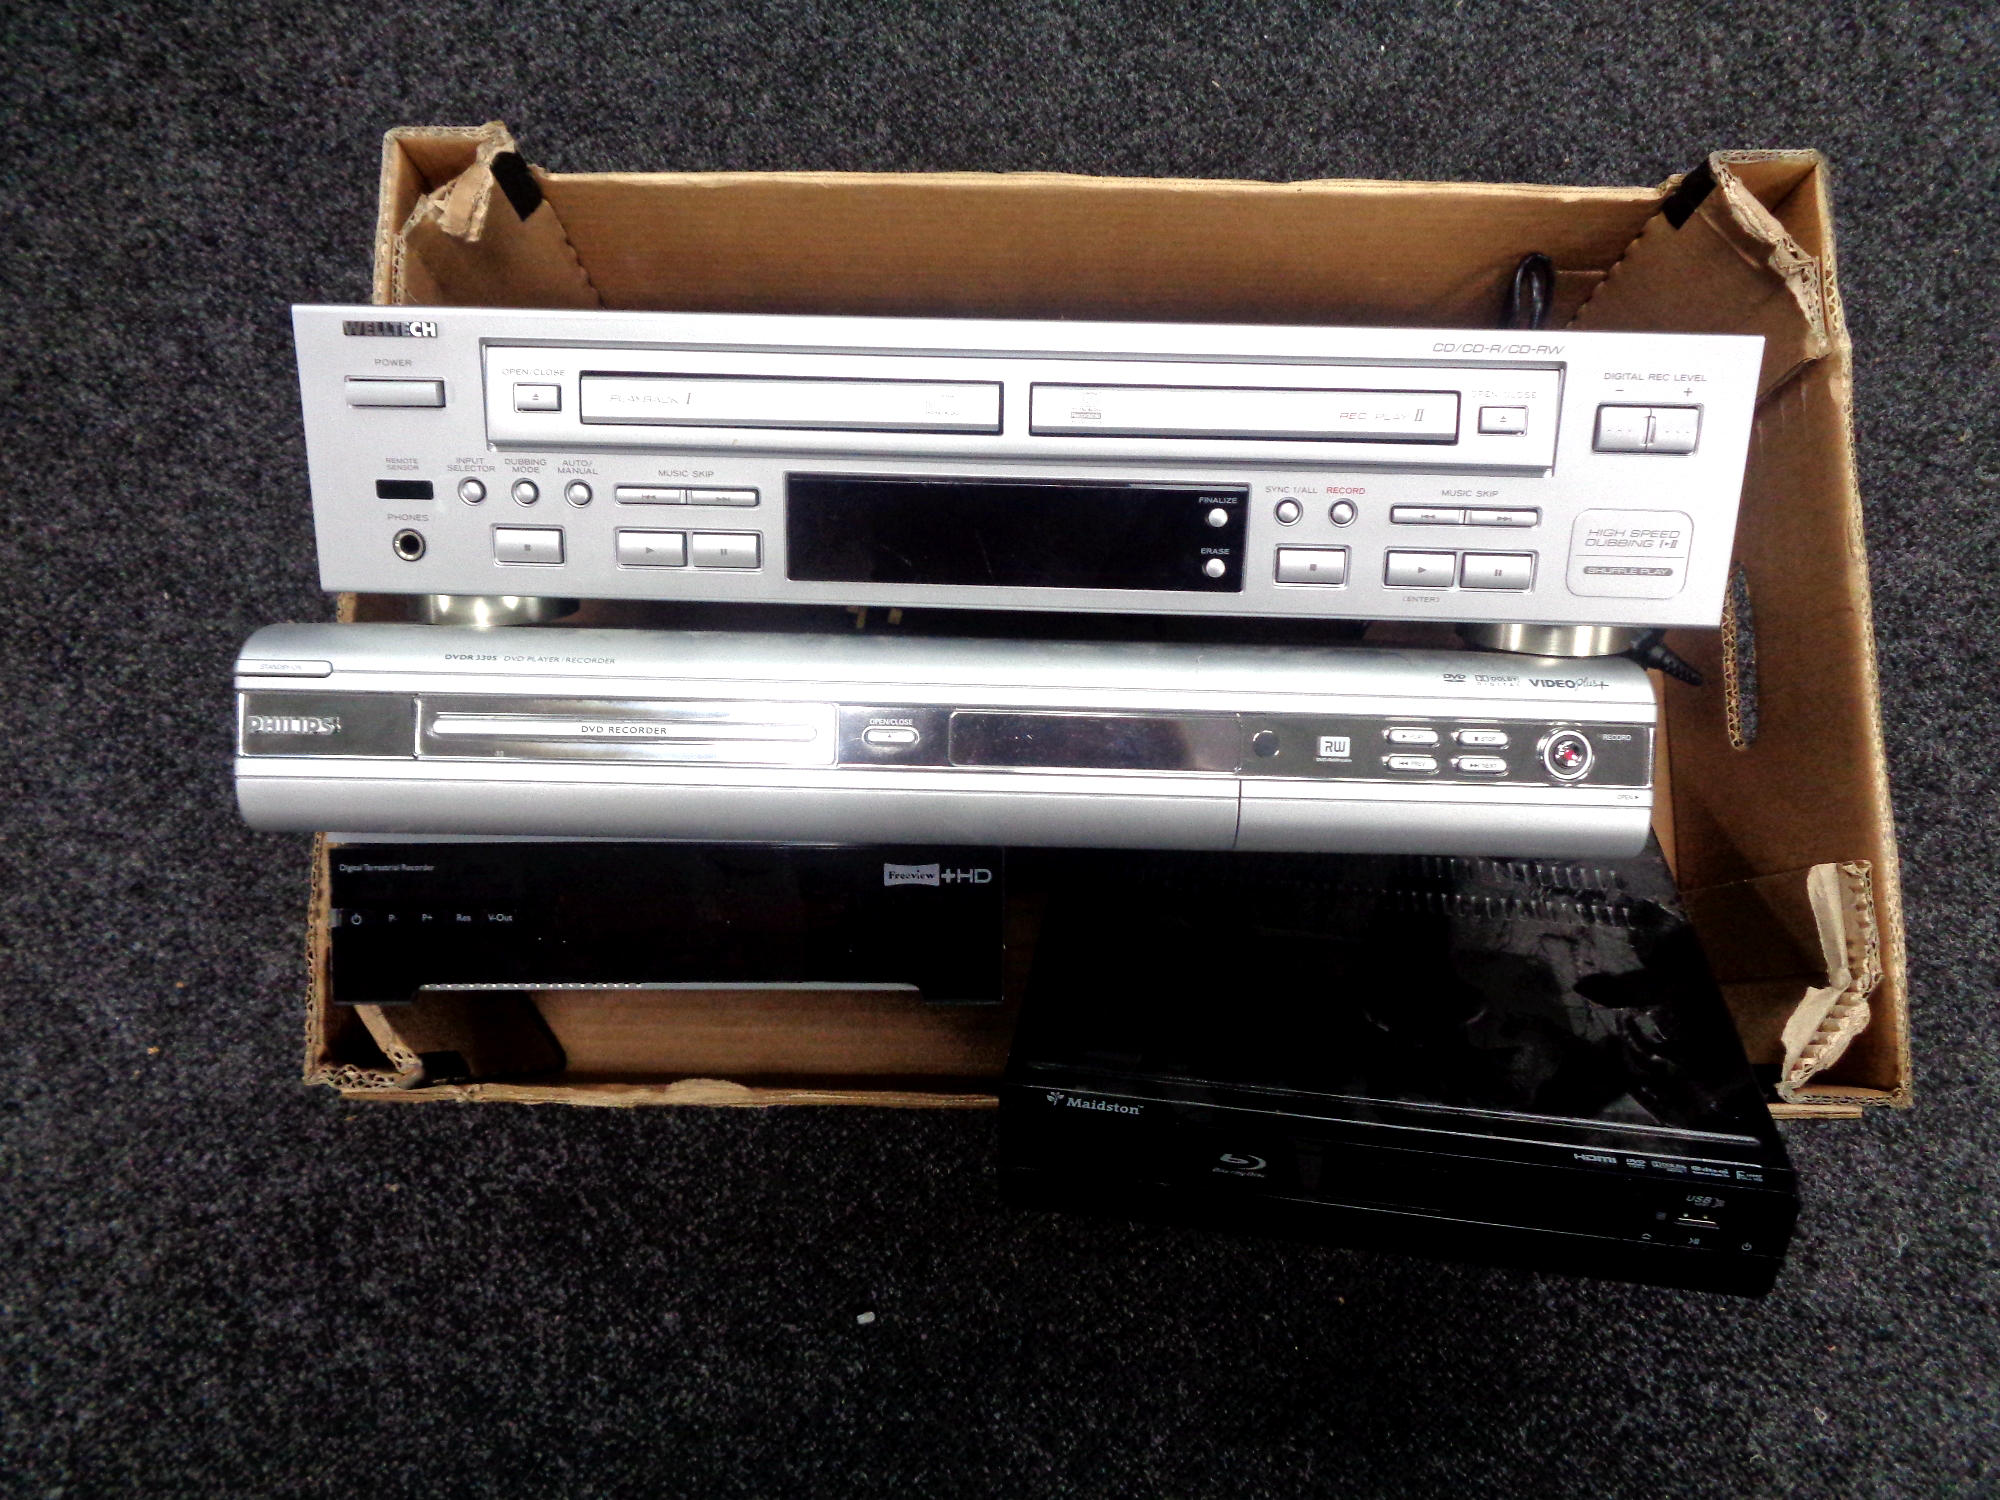 A box of Welltech CD twin deck recorder, Phillips DVD recorder, Freeview box,